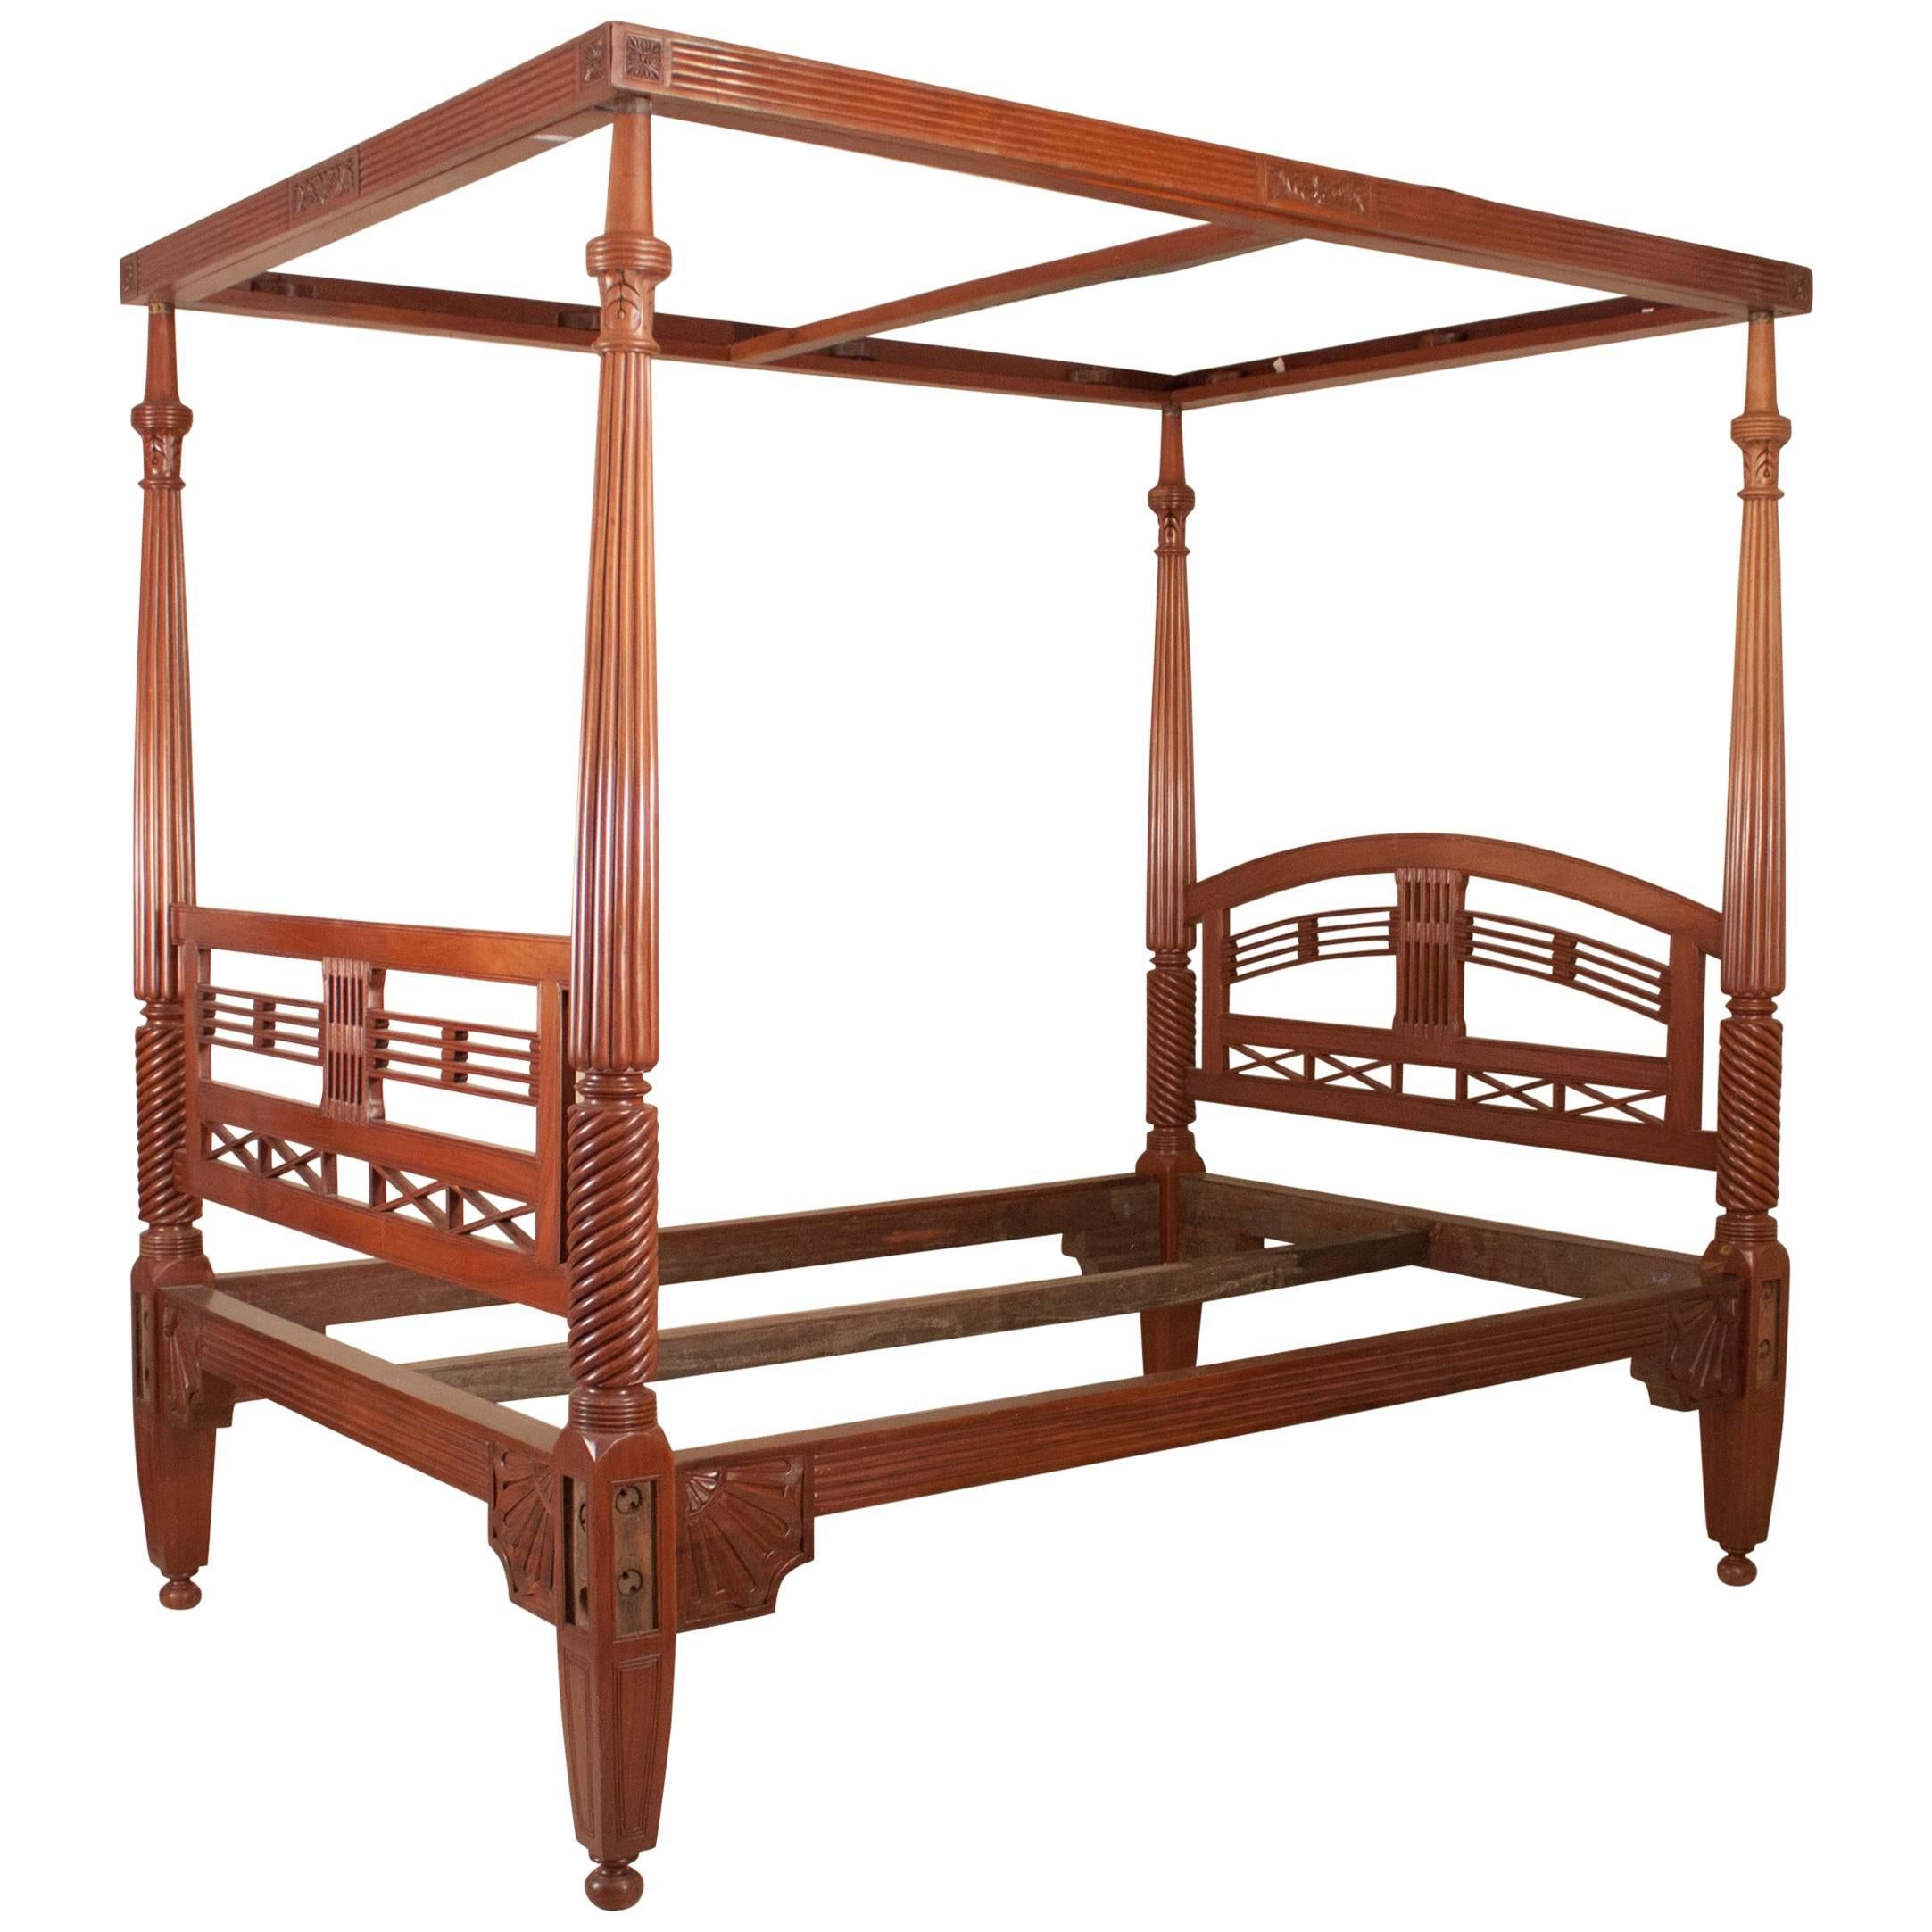 Four Post Mahogany Canopy Bed from British India